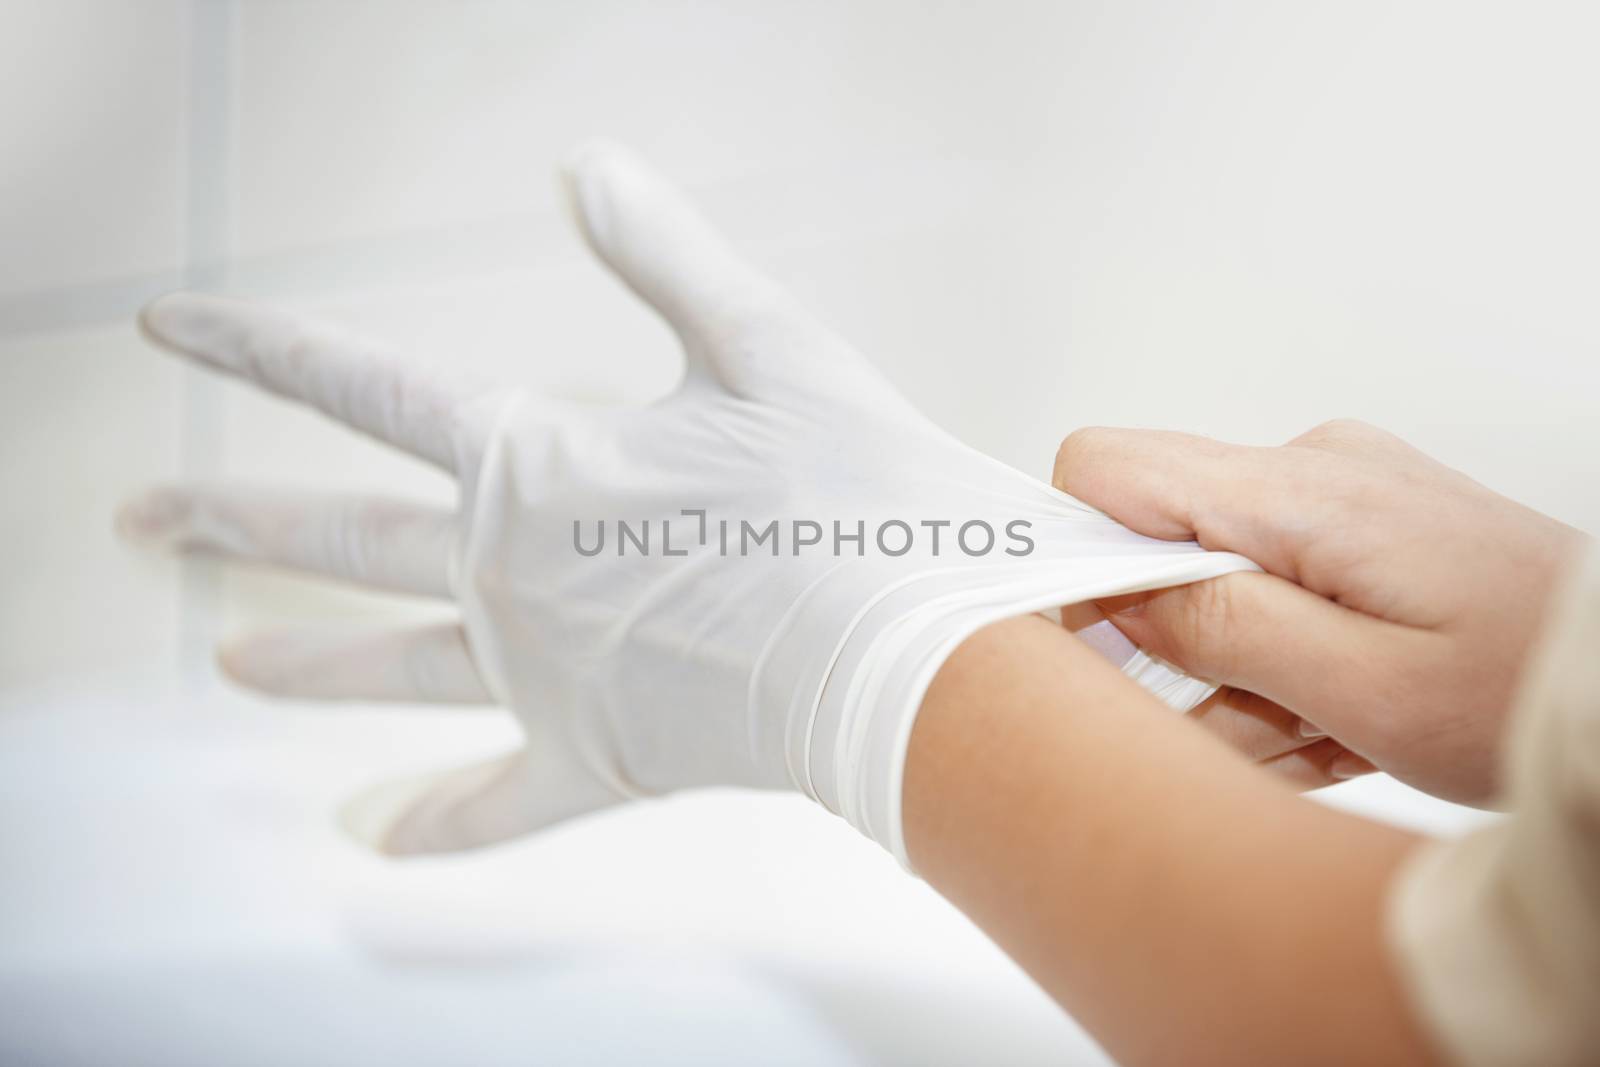 Hands of human taking on rubber gloves